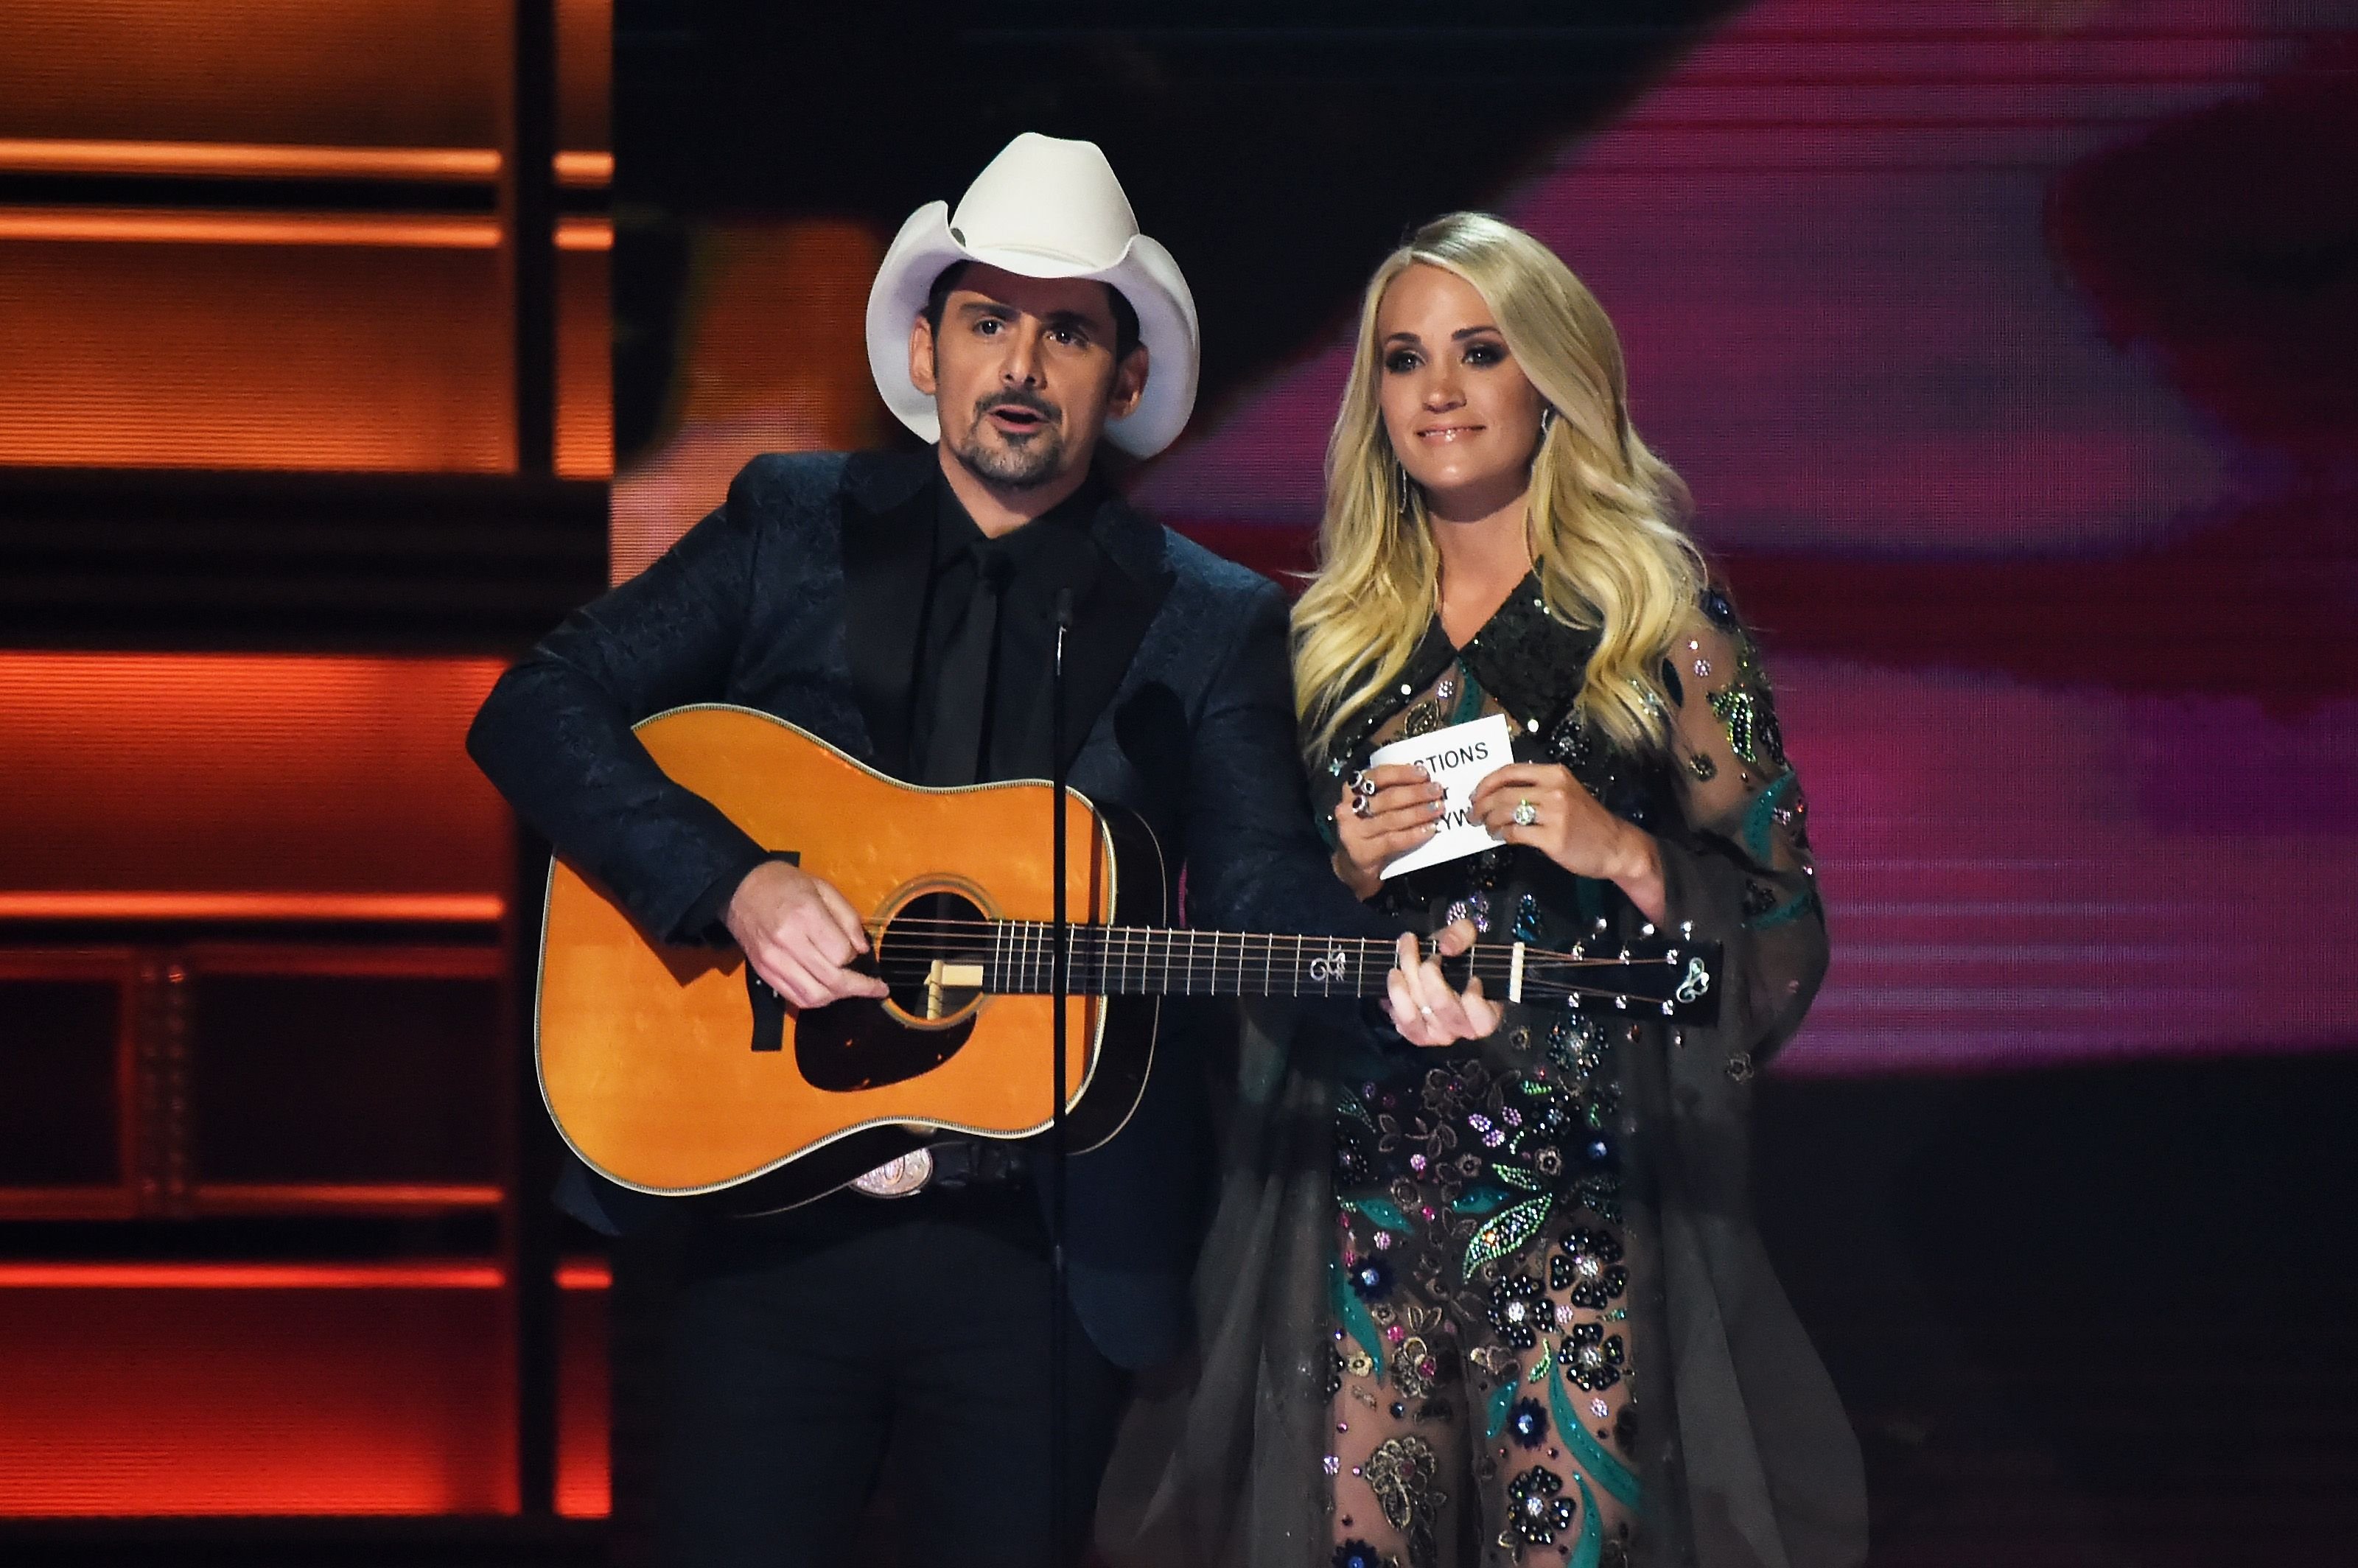 Brad Paisley and Carrie Underwood co-hosting the 51st annual CMA Awards at the Bridgestone Arena on November 8, 2017 in Nashville, Tennessee Photo Getty Images